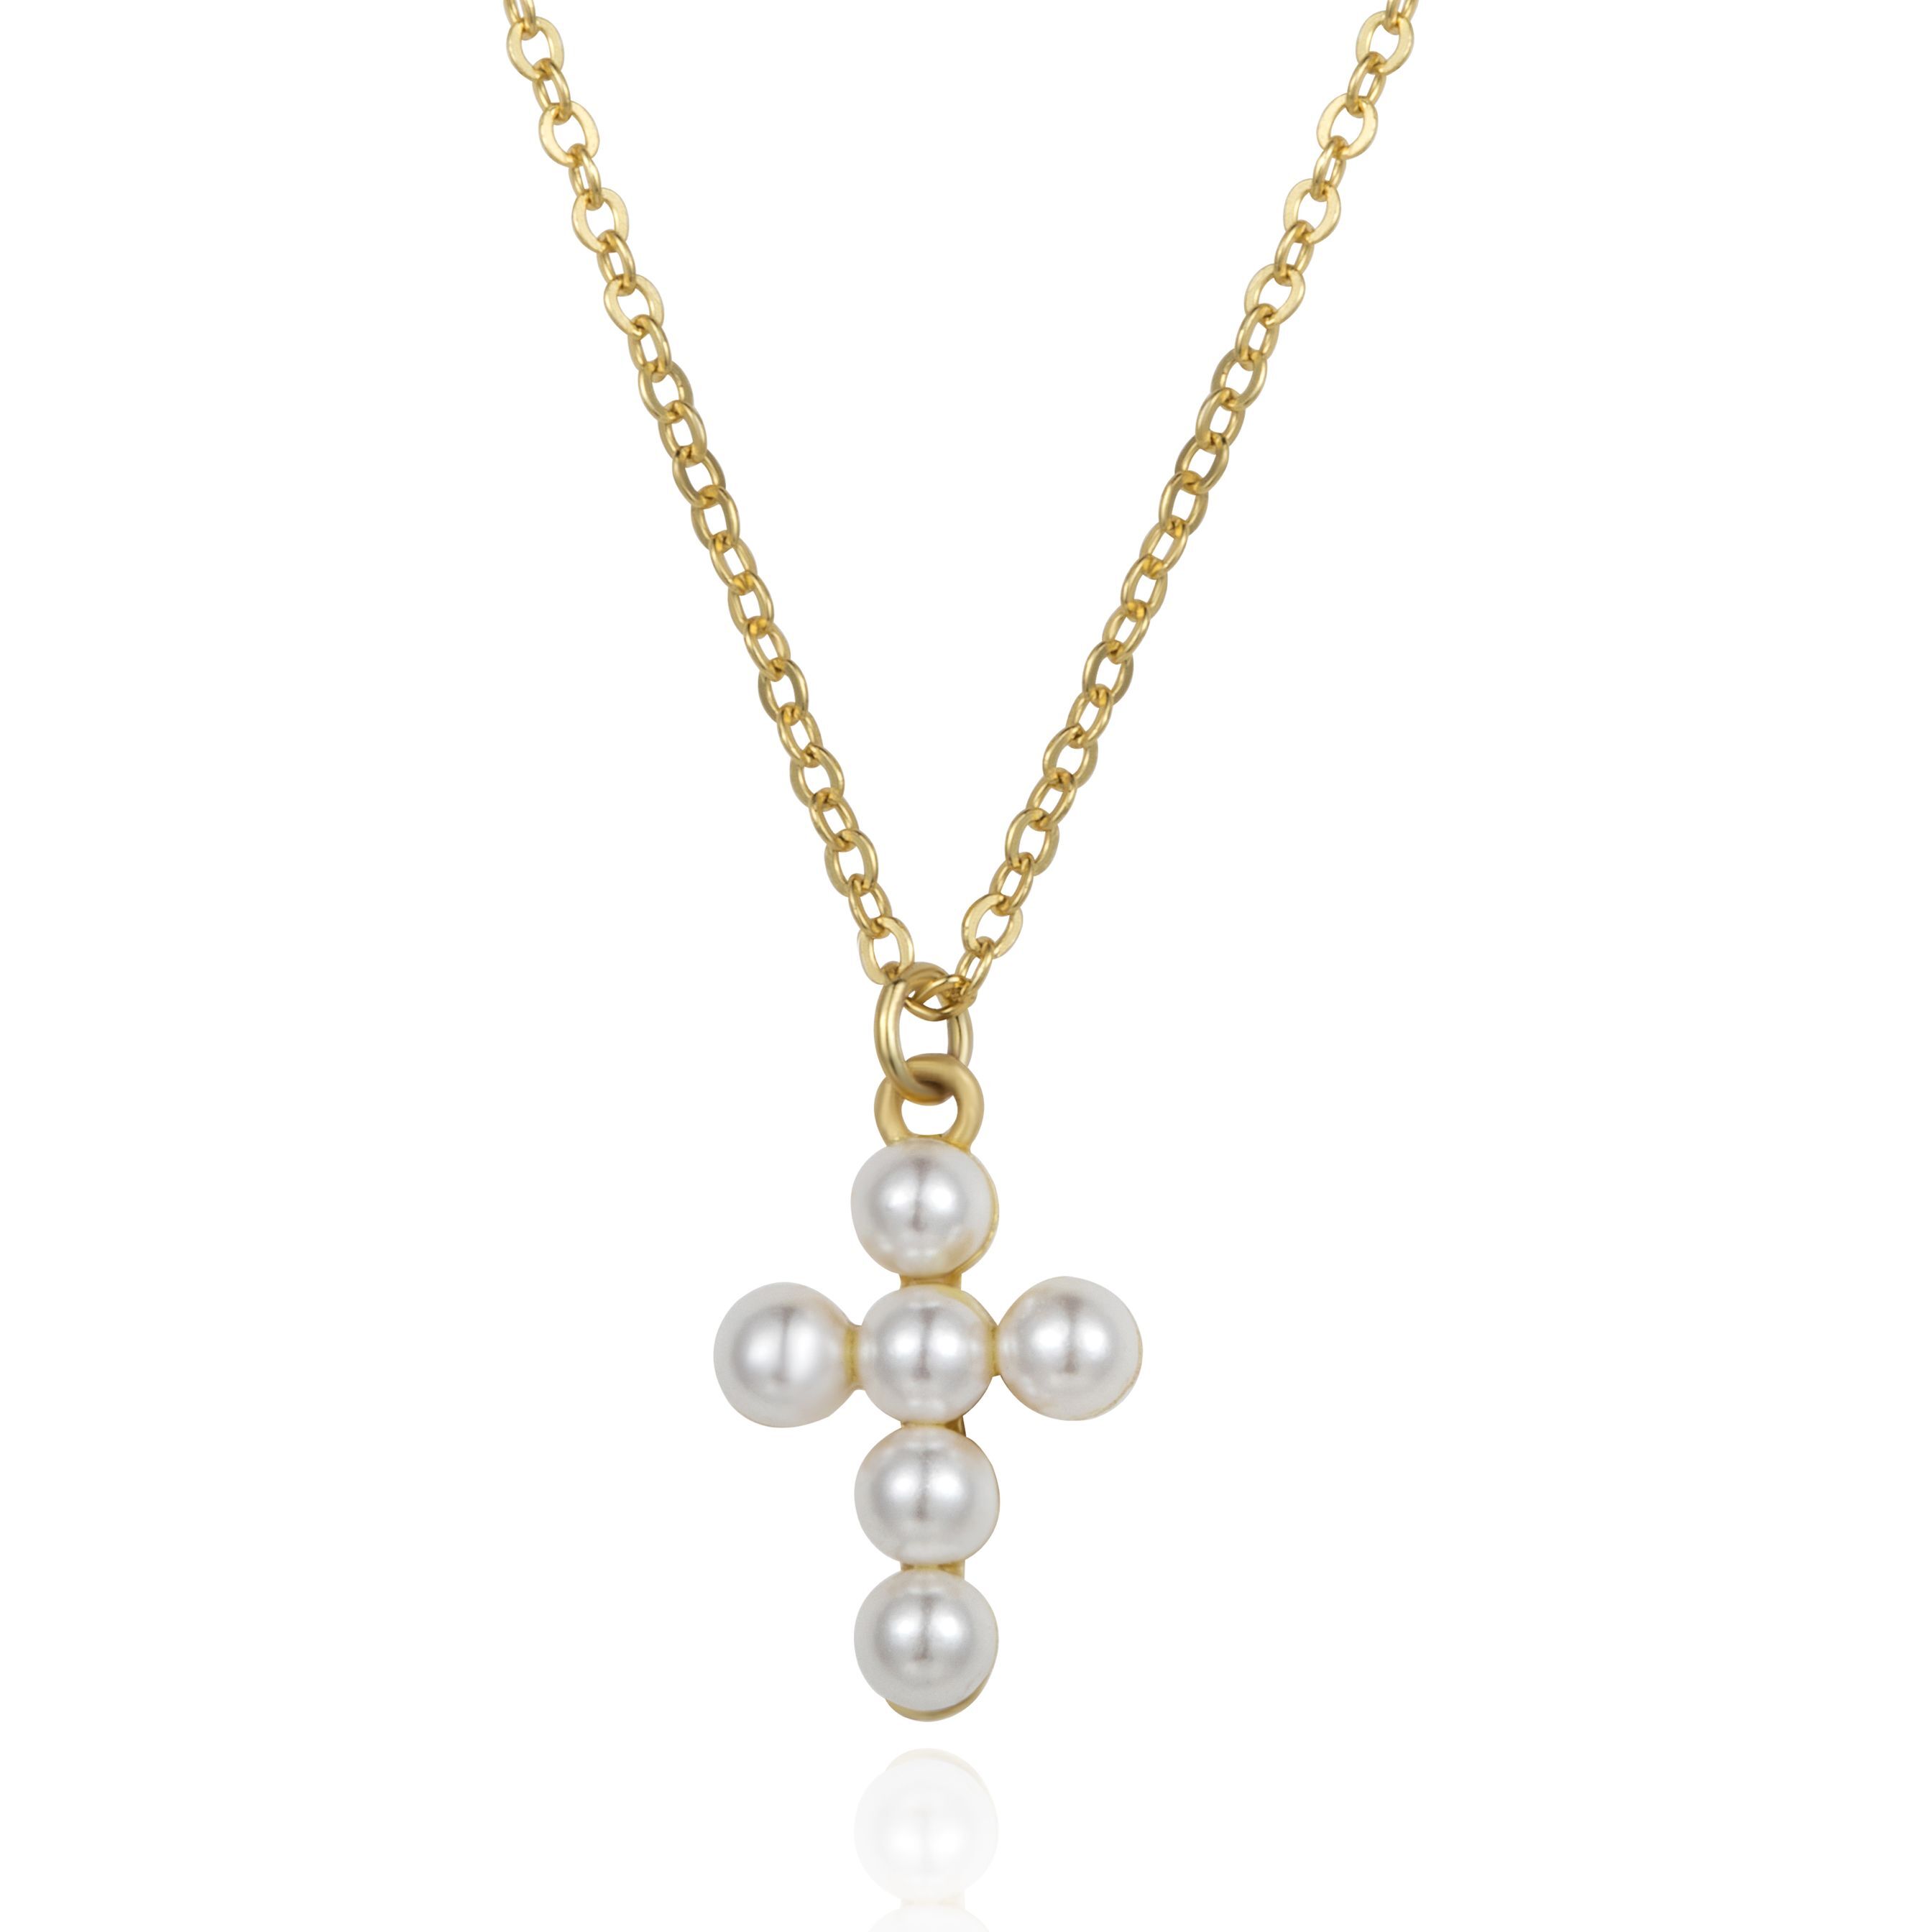 Aggregate more than 73 pearl necklace with cross pendant best - POPPY